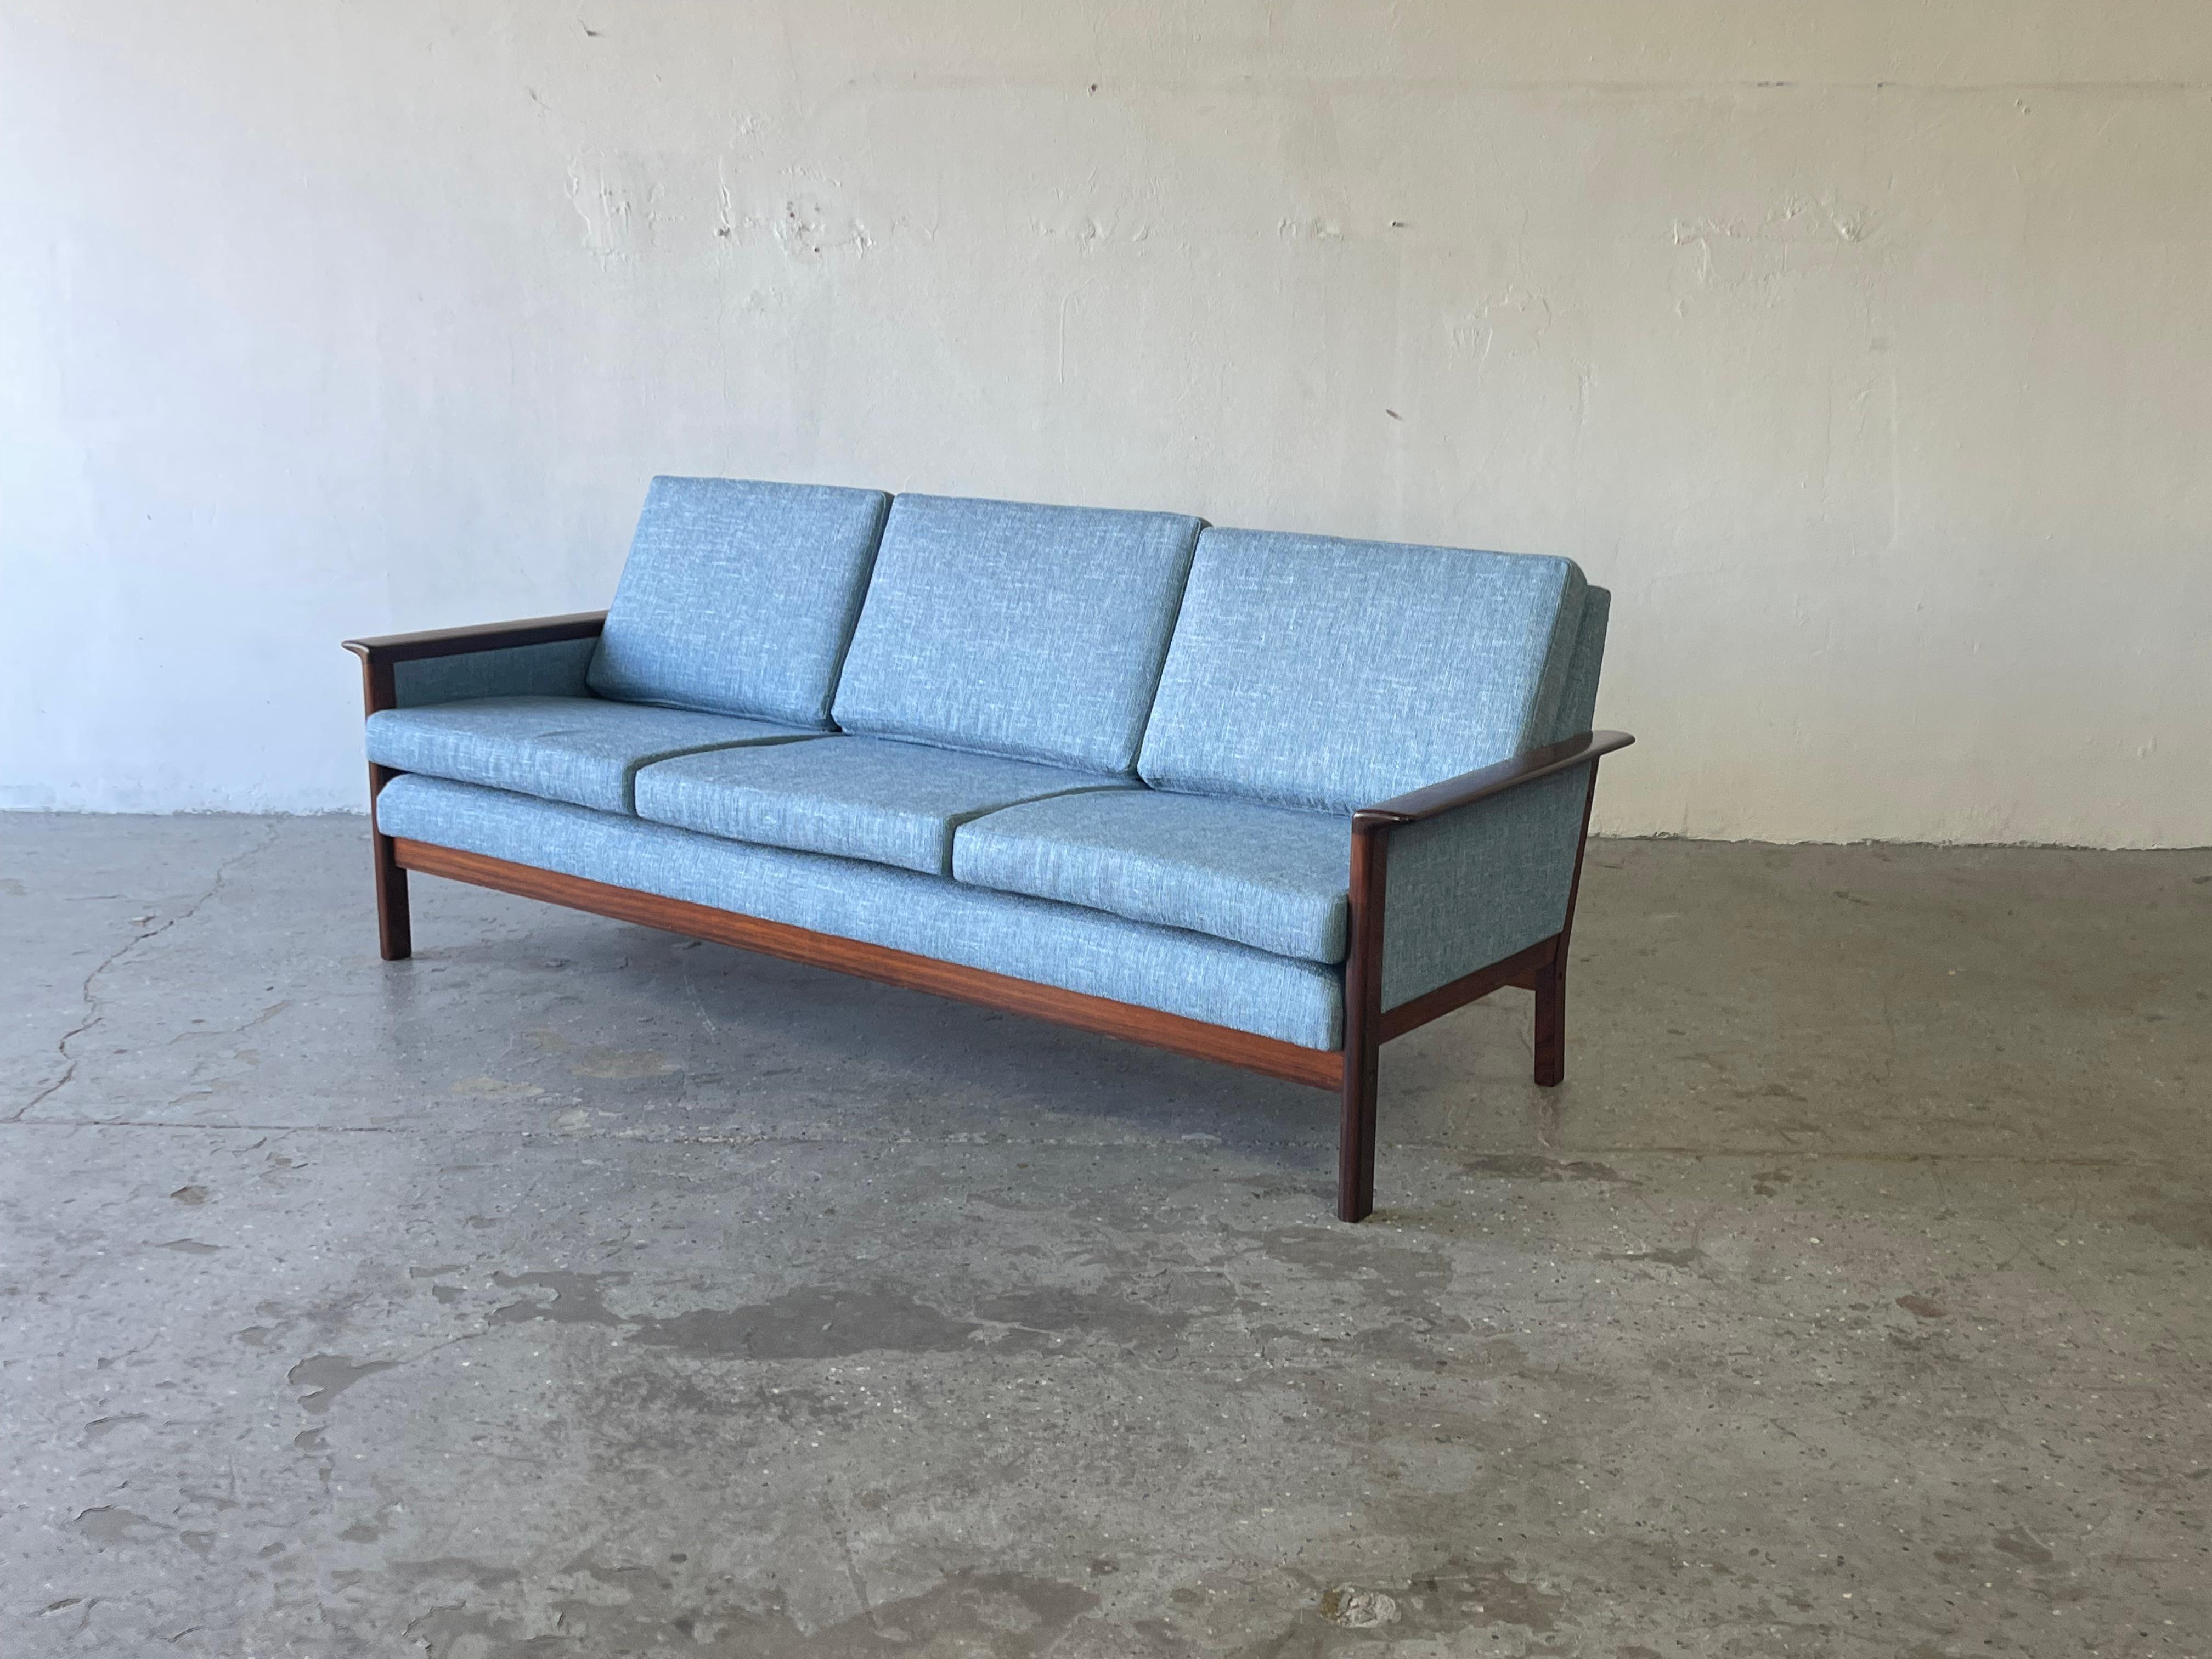 Mid-20th Century Danish Mid-Century Modern Rosewood Sofa by Westnofa For Sale